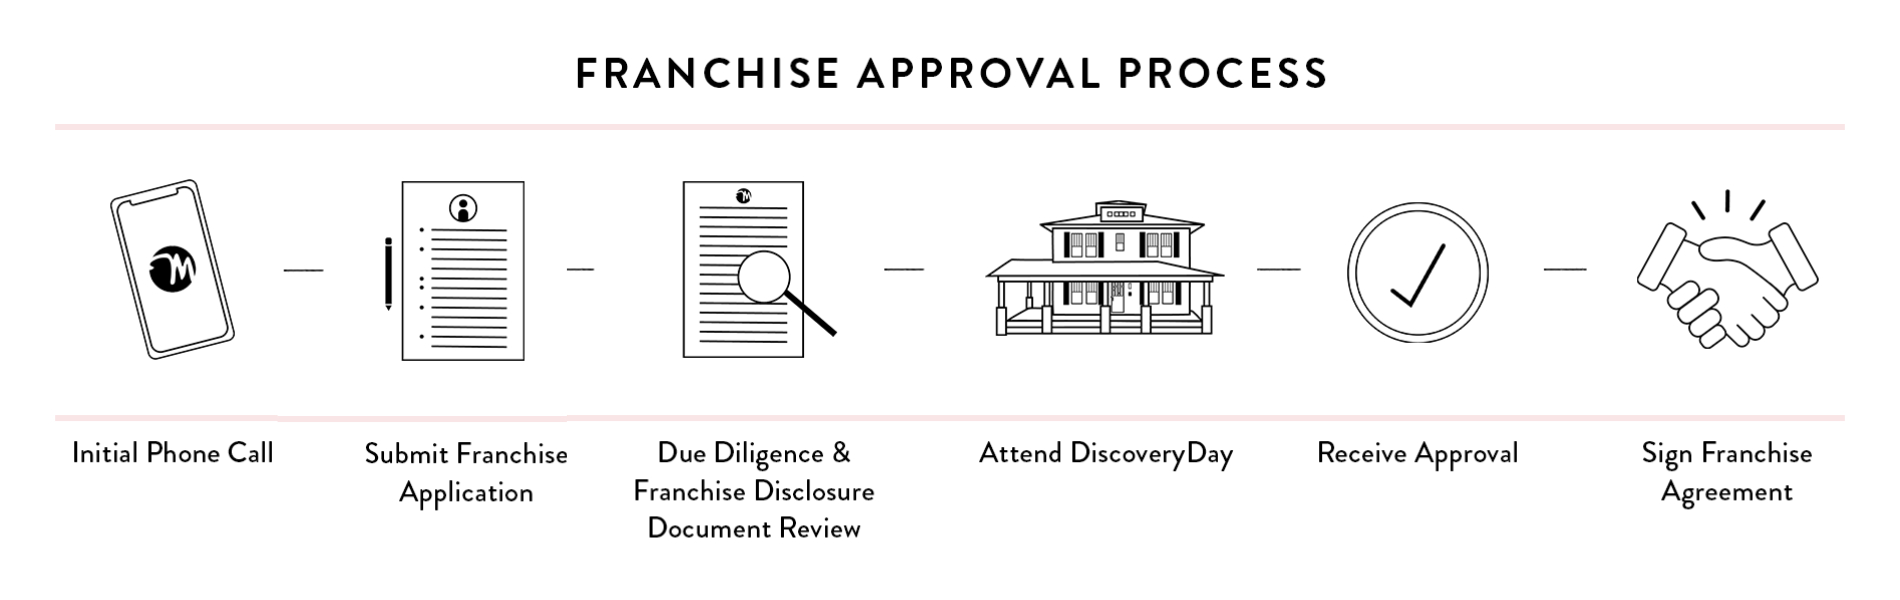 Women's Boutique Franchise Approval Process: Initial phone call, due diligence and franchise disclosure review, submit franchise application, attend discovery day, receive approval, sign franchise agreement,